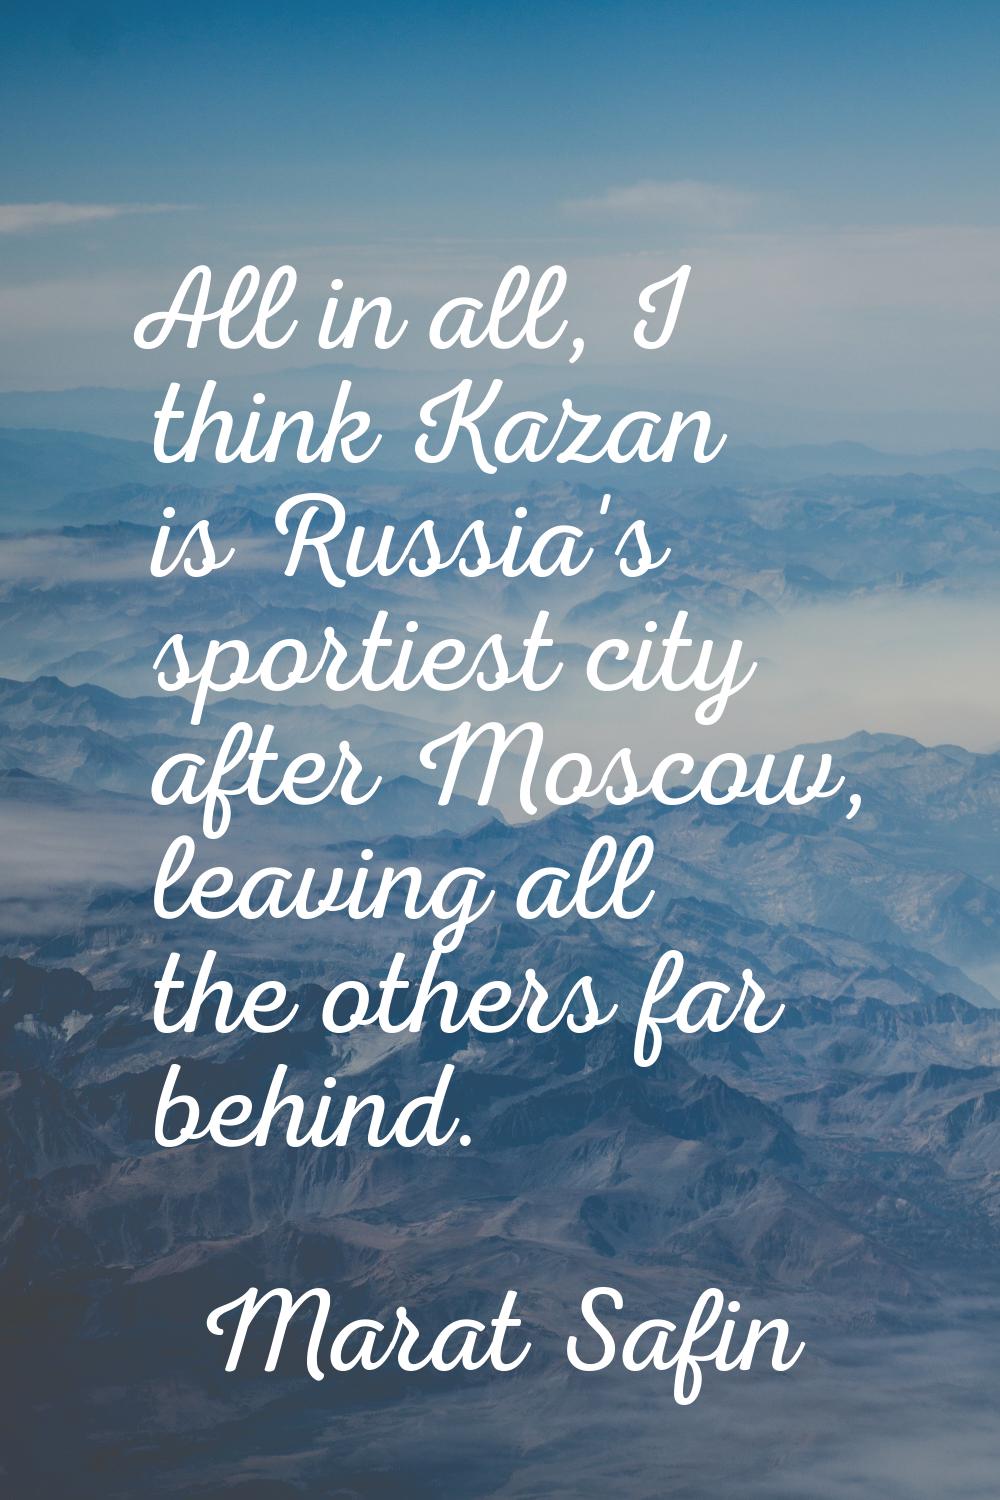 All in all, I think Kazan is Russia's sportiest city after Moscow, leaving all the others far behin